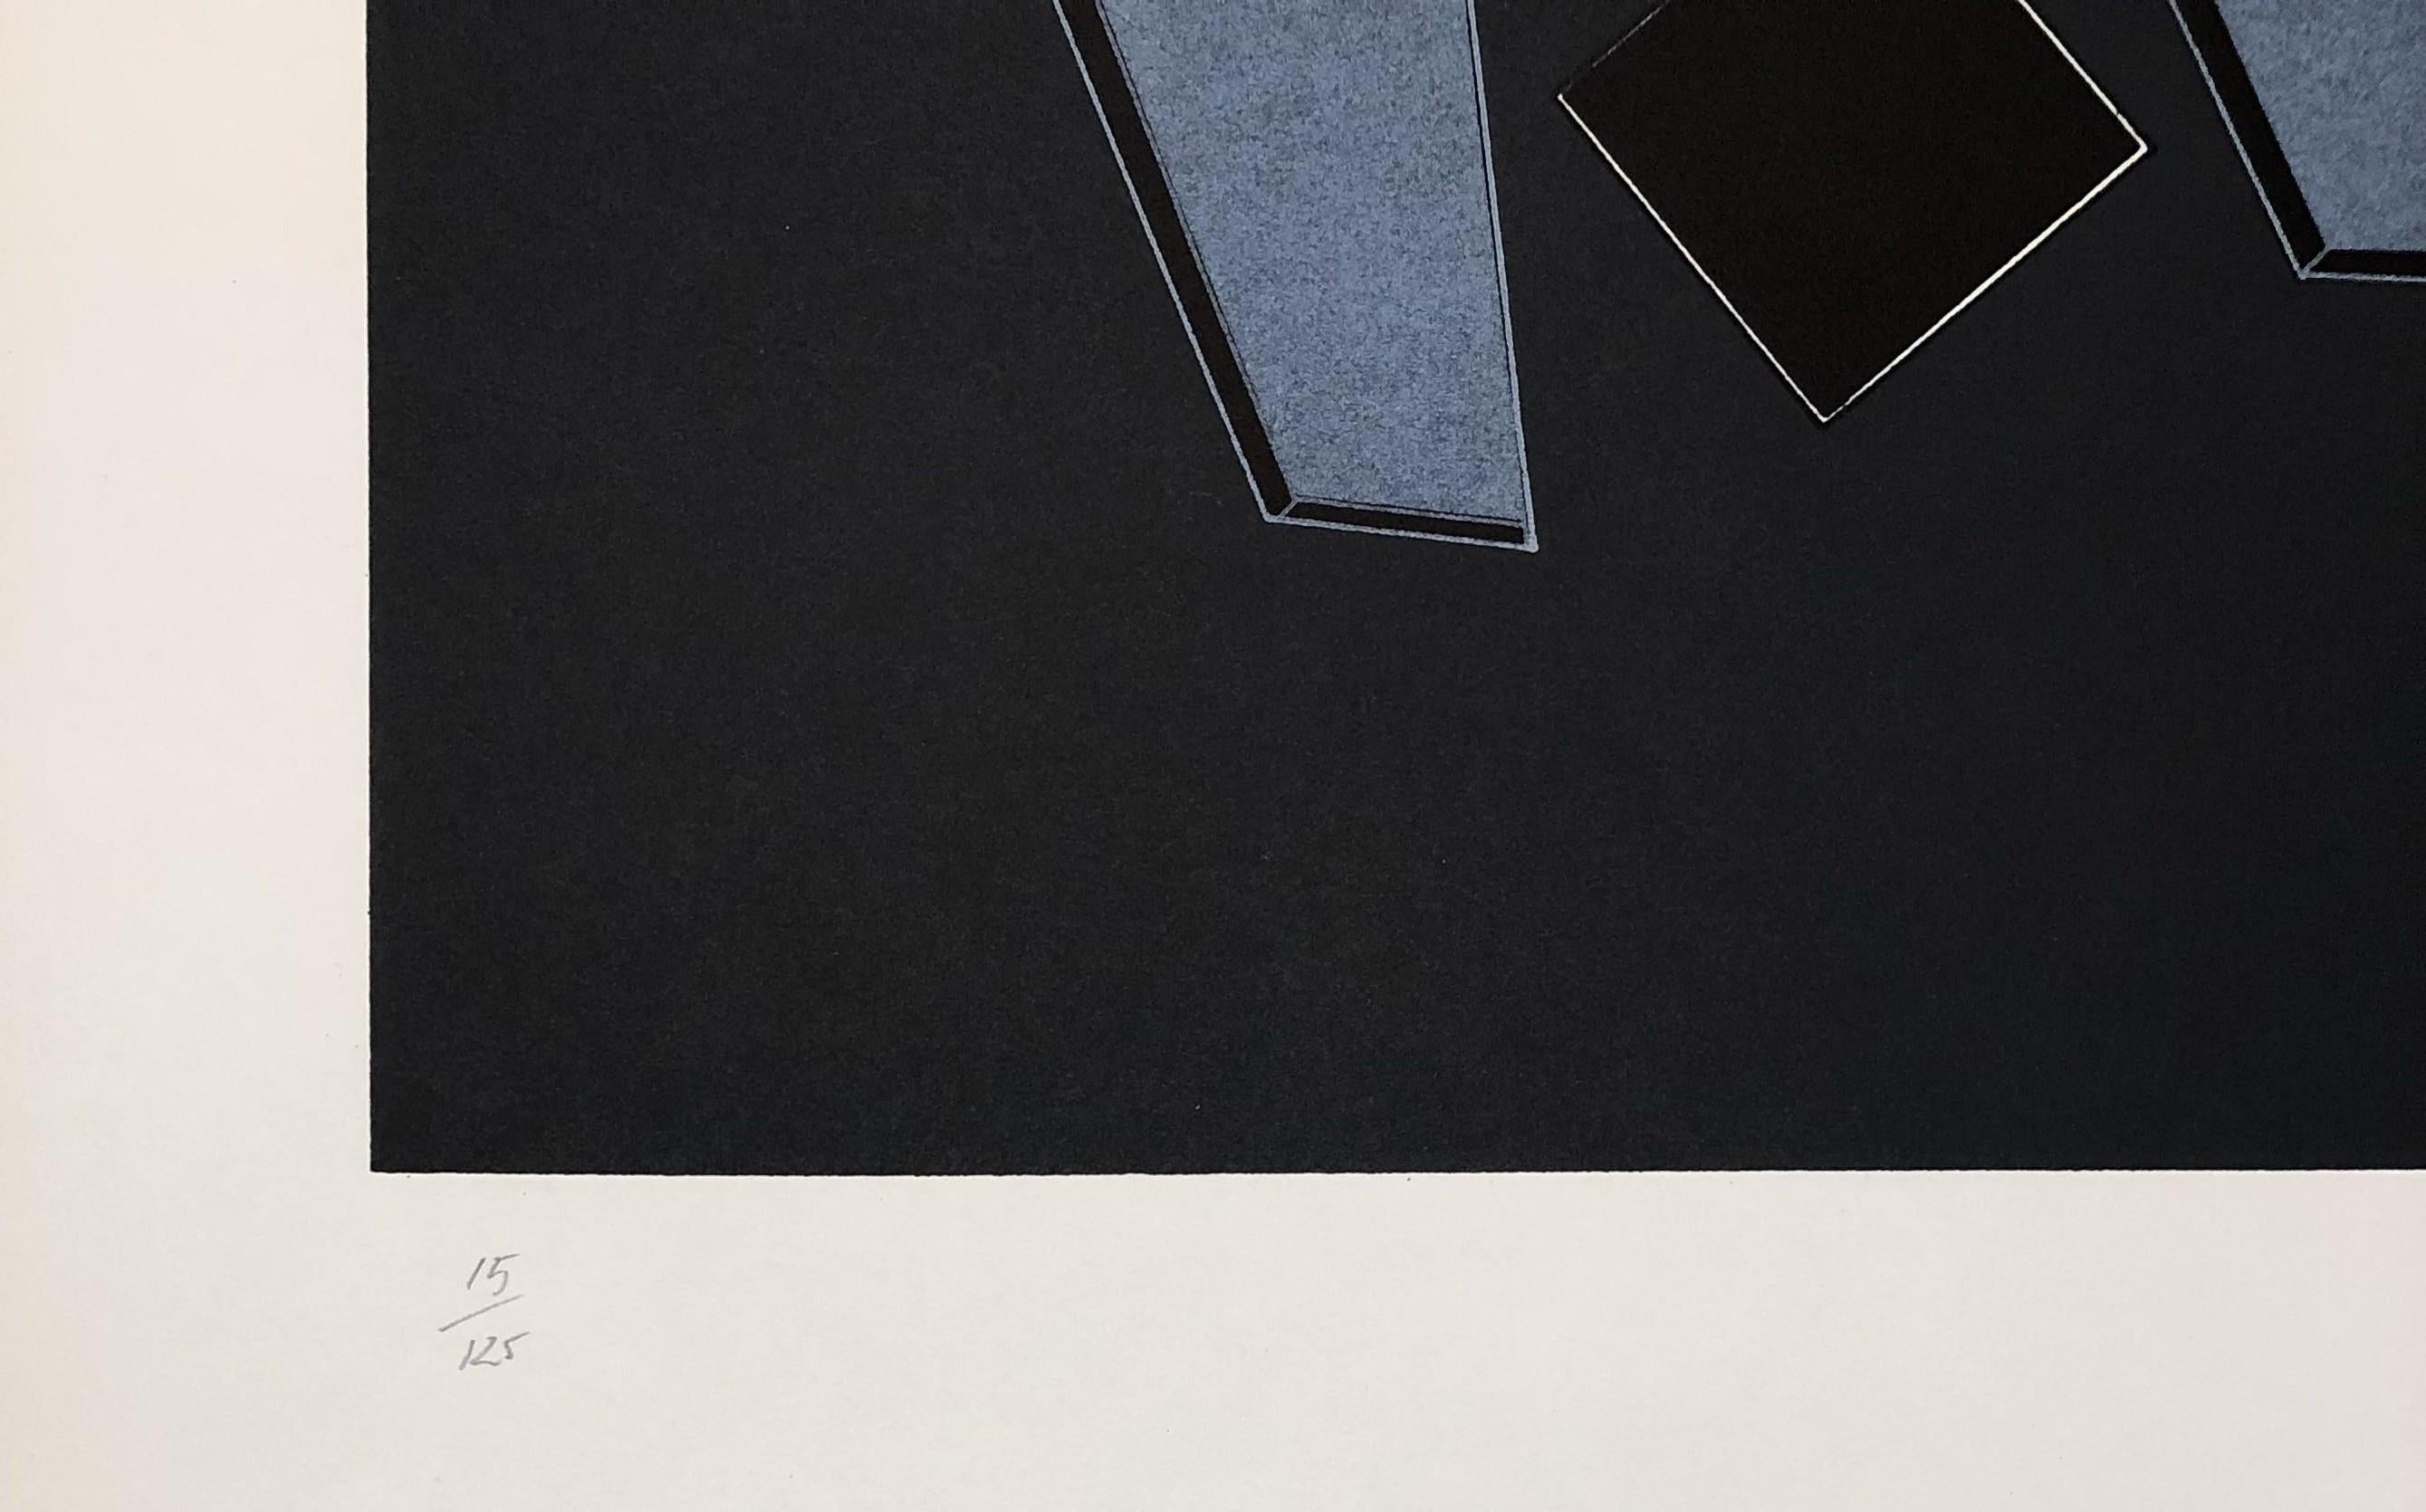 Geometric Composition IV - Original Lithograph Handsigned - 125 copies - Black Abstract Print by Alain Le Yaouanc